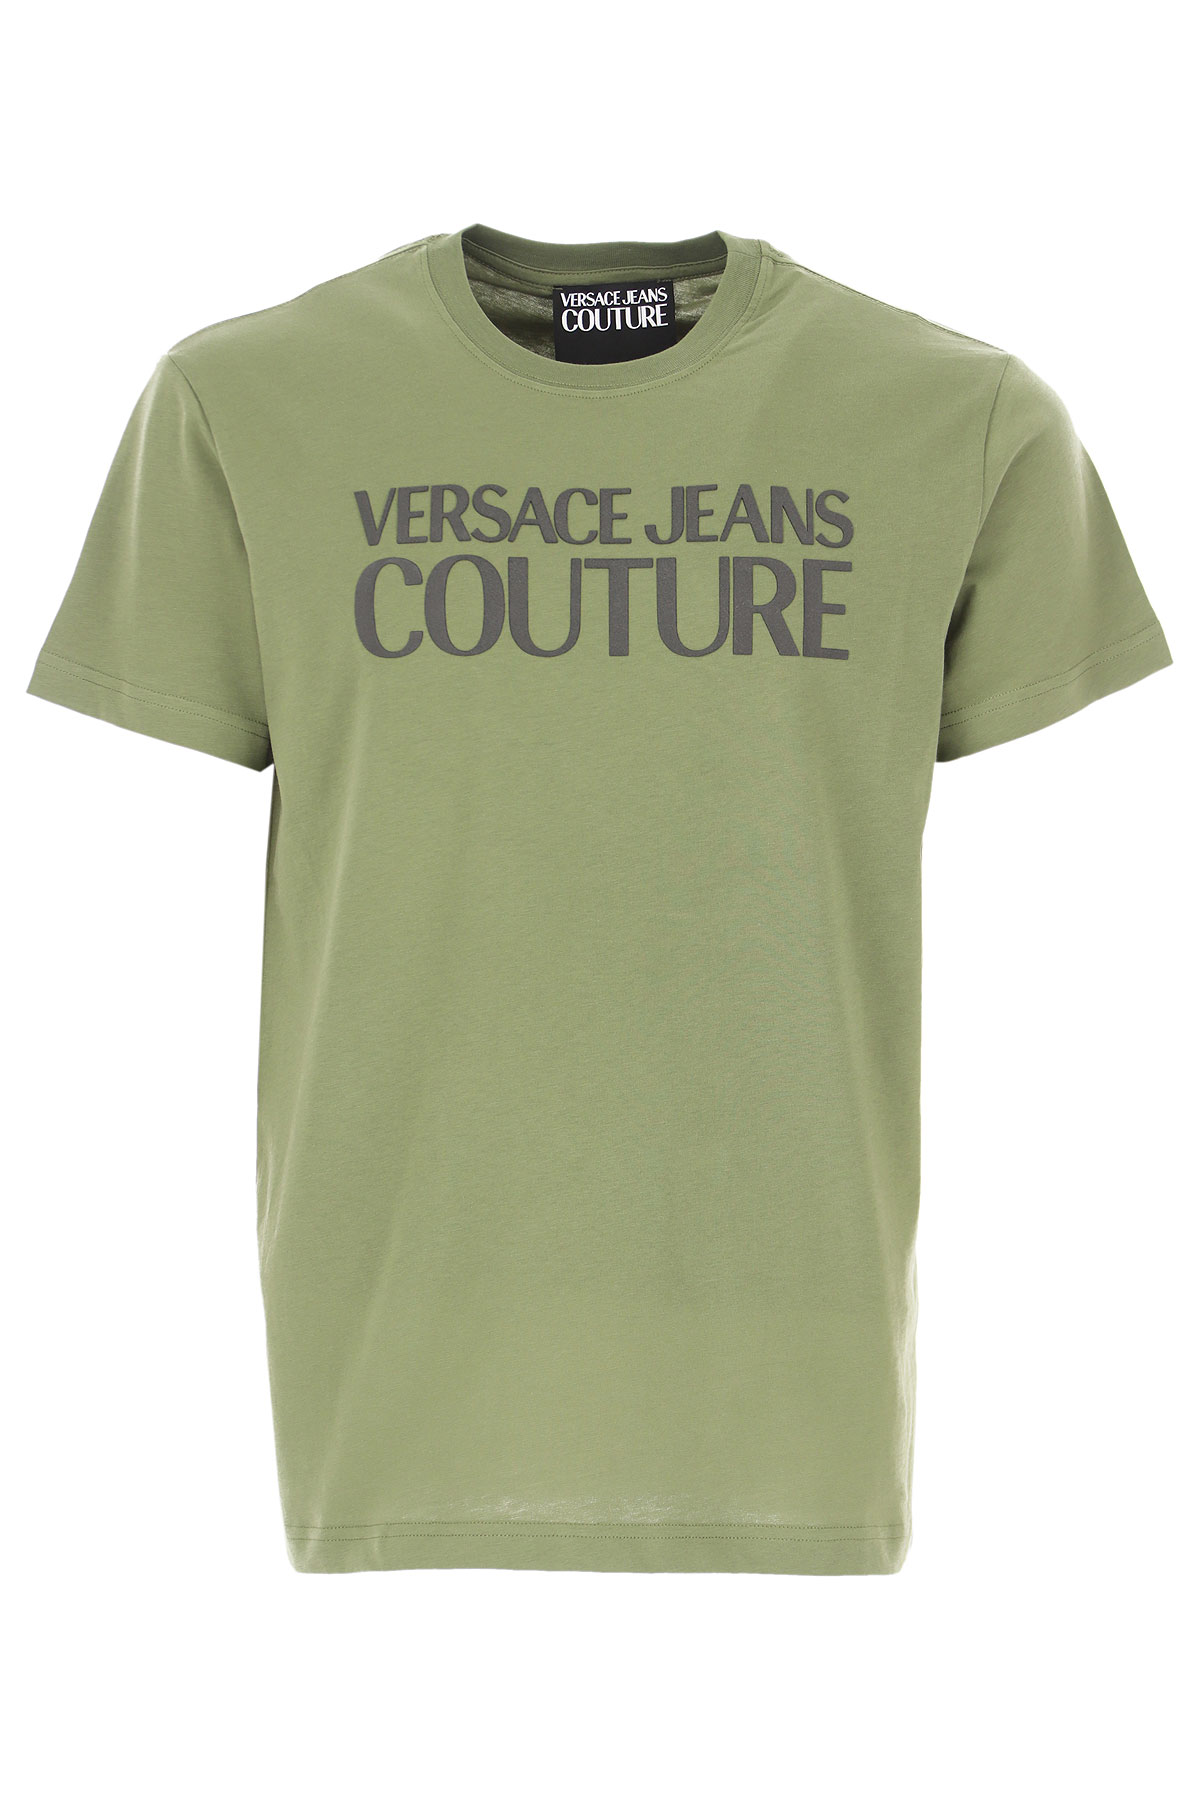 Peer Favorite Versace Jeans Couture T-Shirt for Men, Military Green